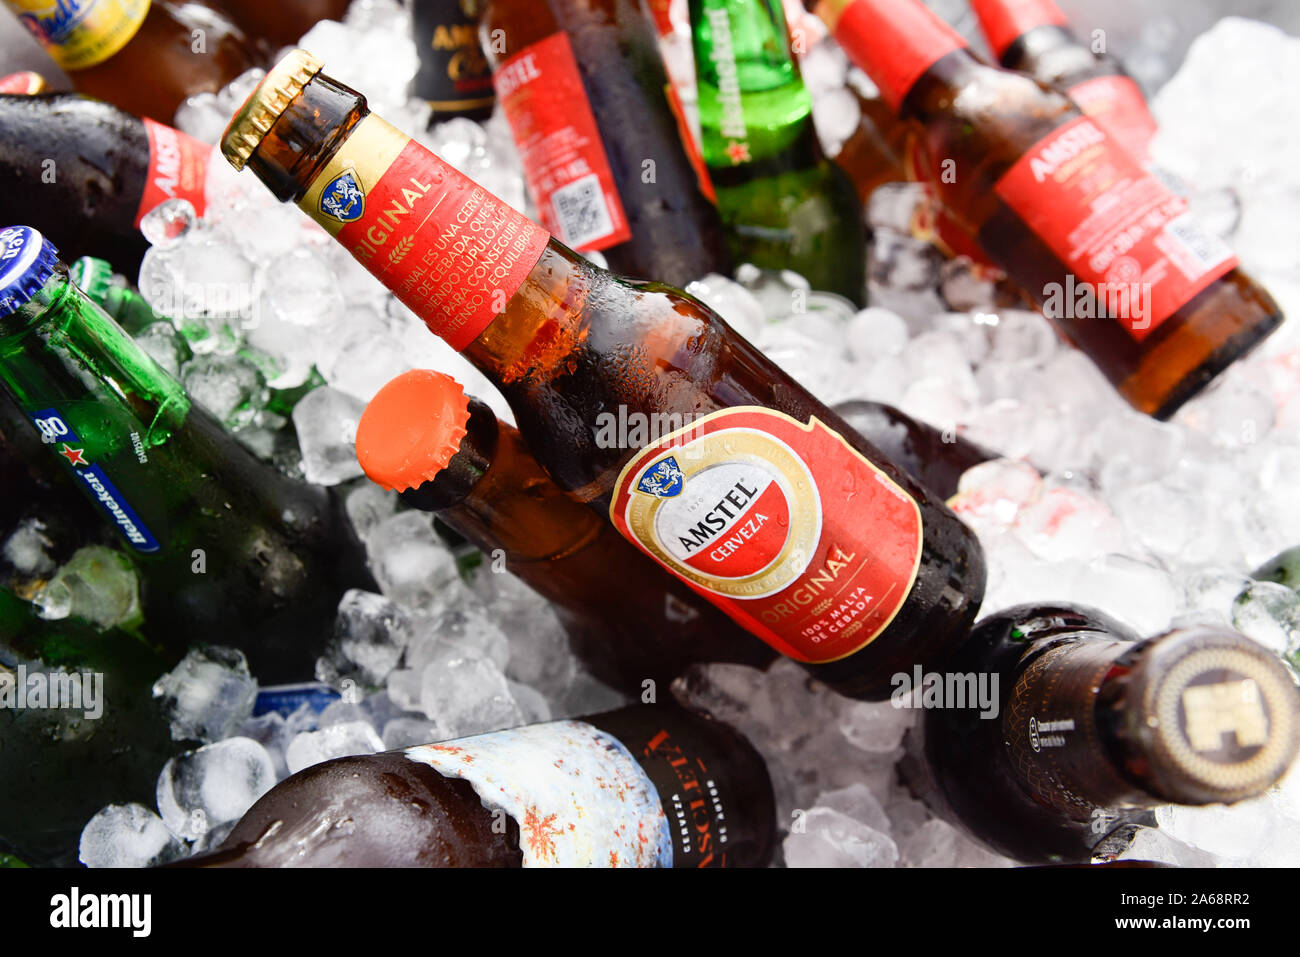 Valencia, Spain - October 12, 2019: Amstel beer bottles in a bucket with ice during a catering event. Stock Photo